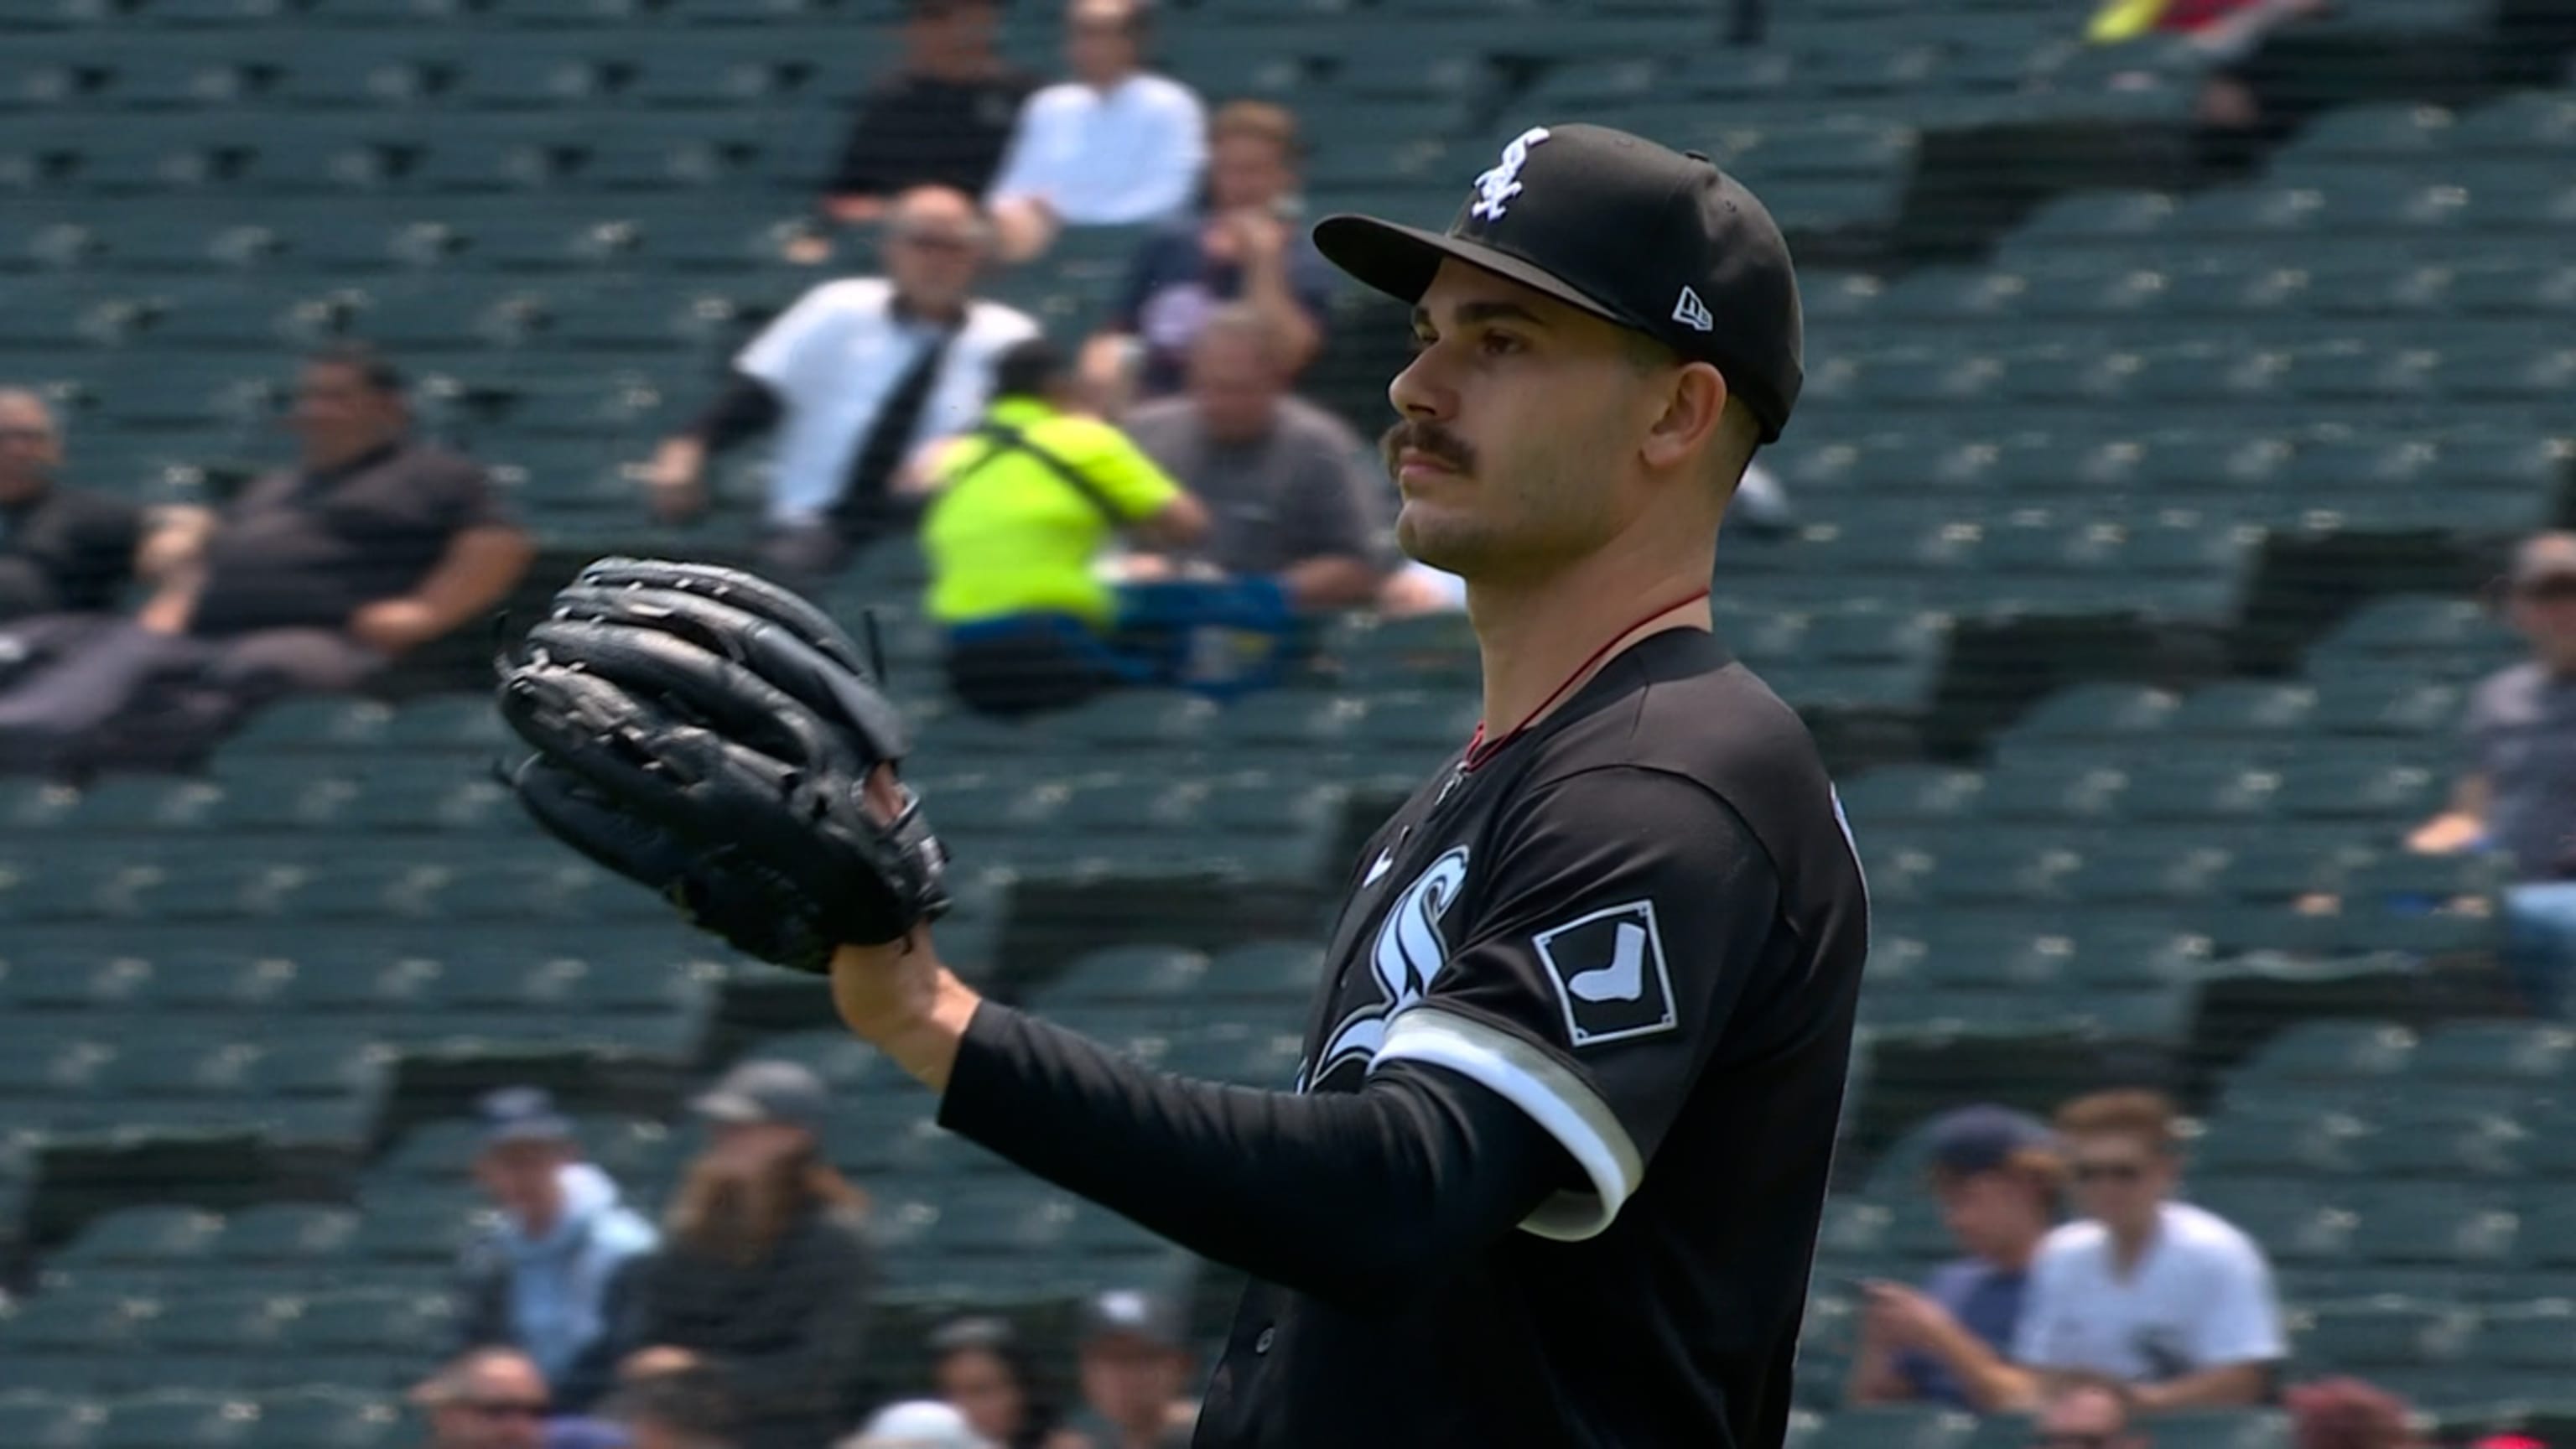 White Sox 3, Yankees 2: Zavala launches two homers - South Side Sox